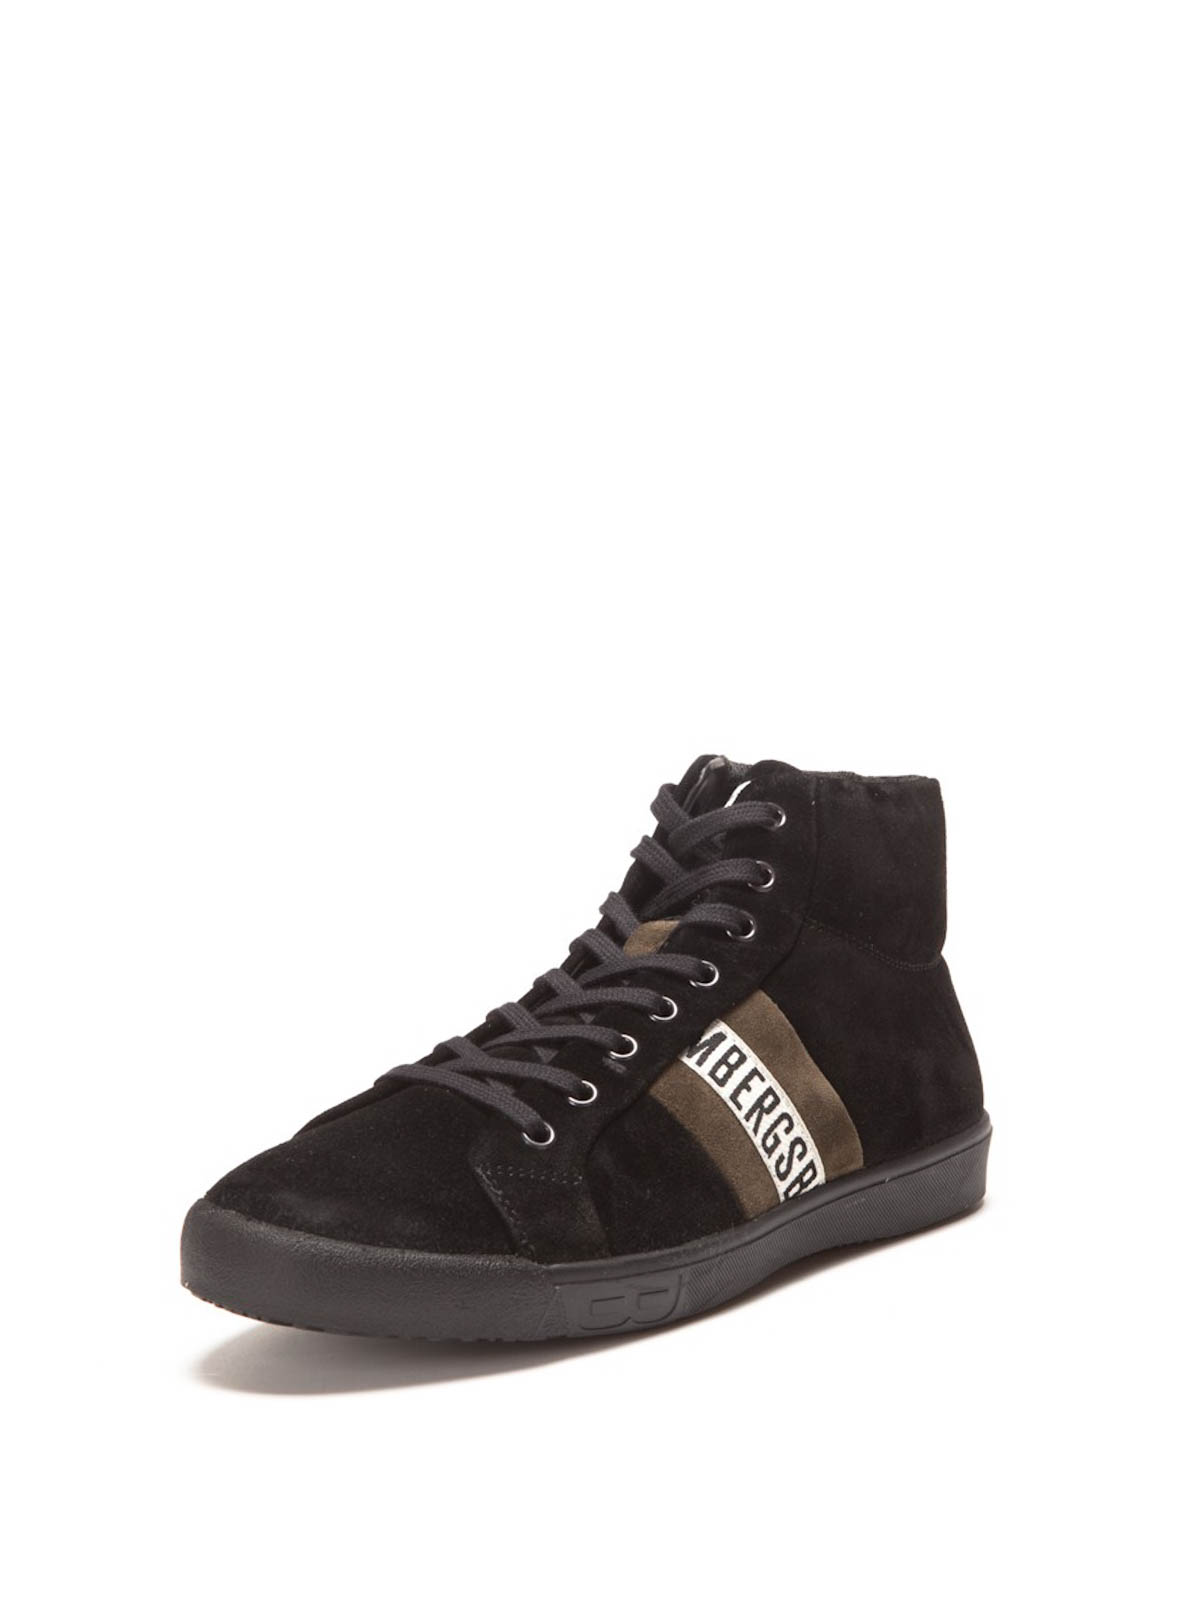 Understand and buy bikkembergs high top sneakers> OFF-52%